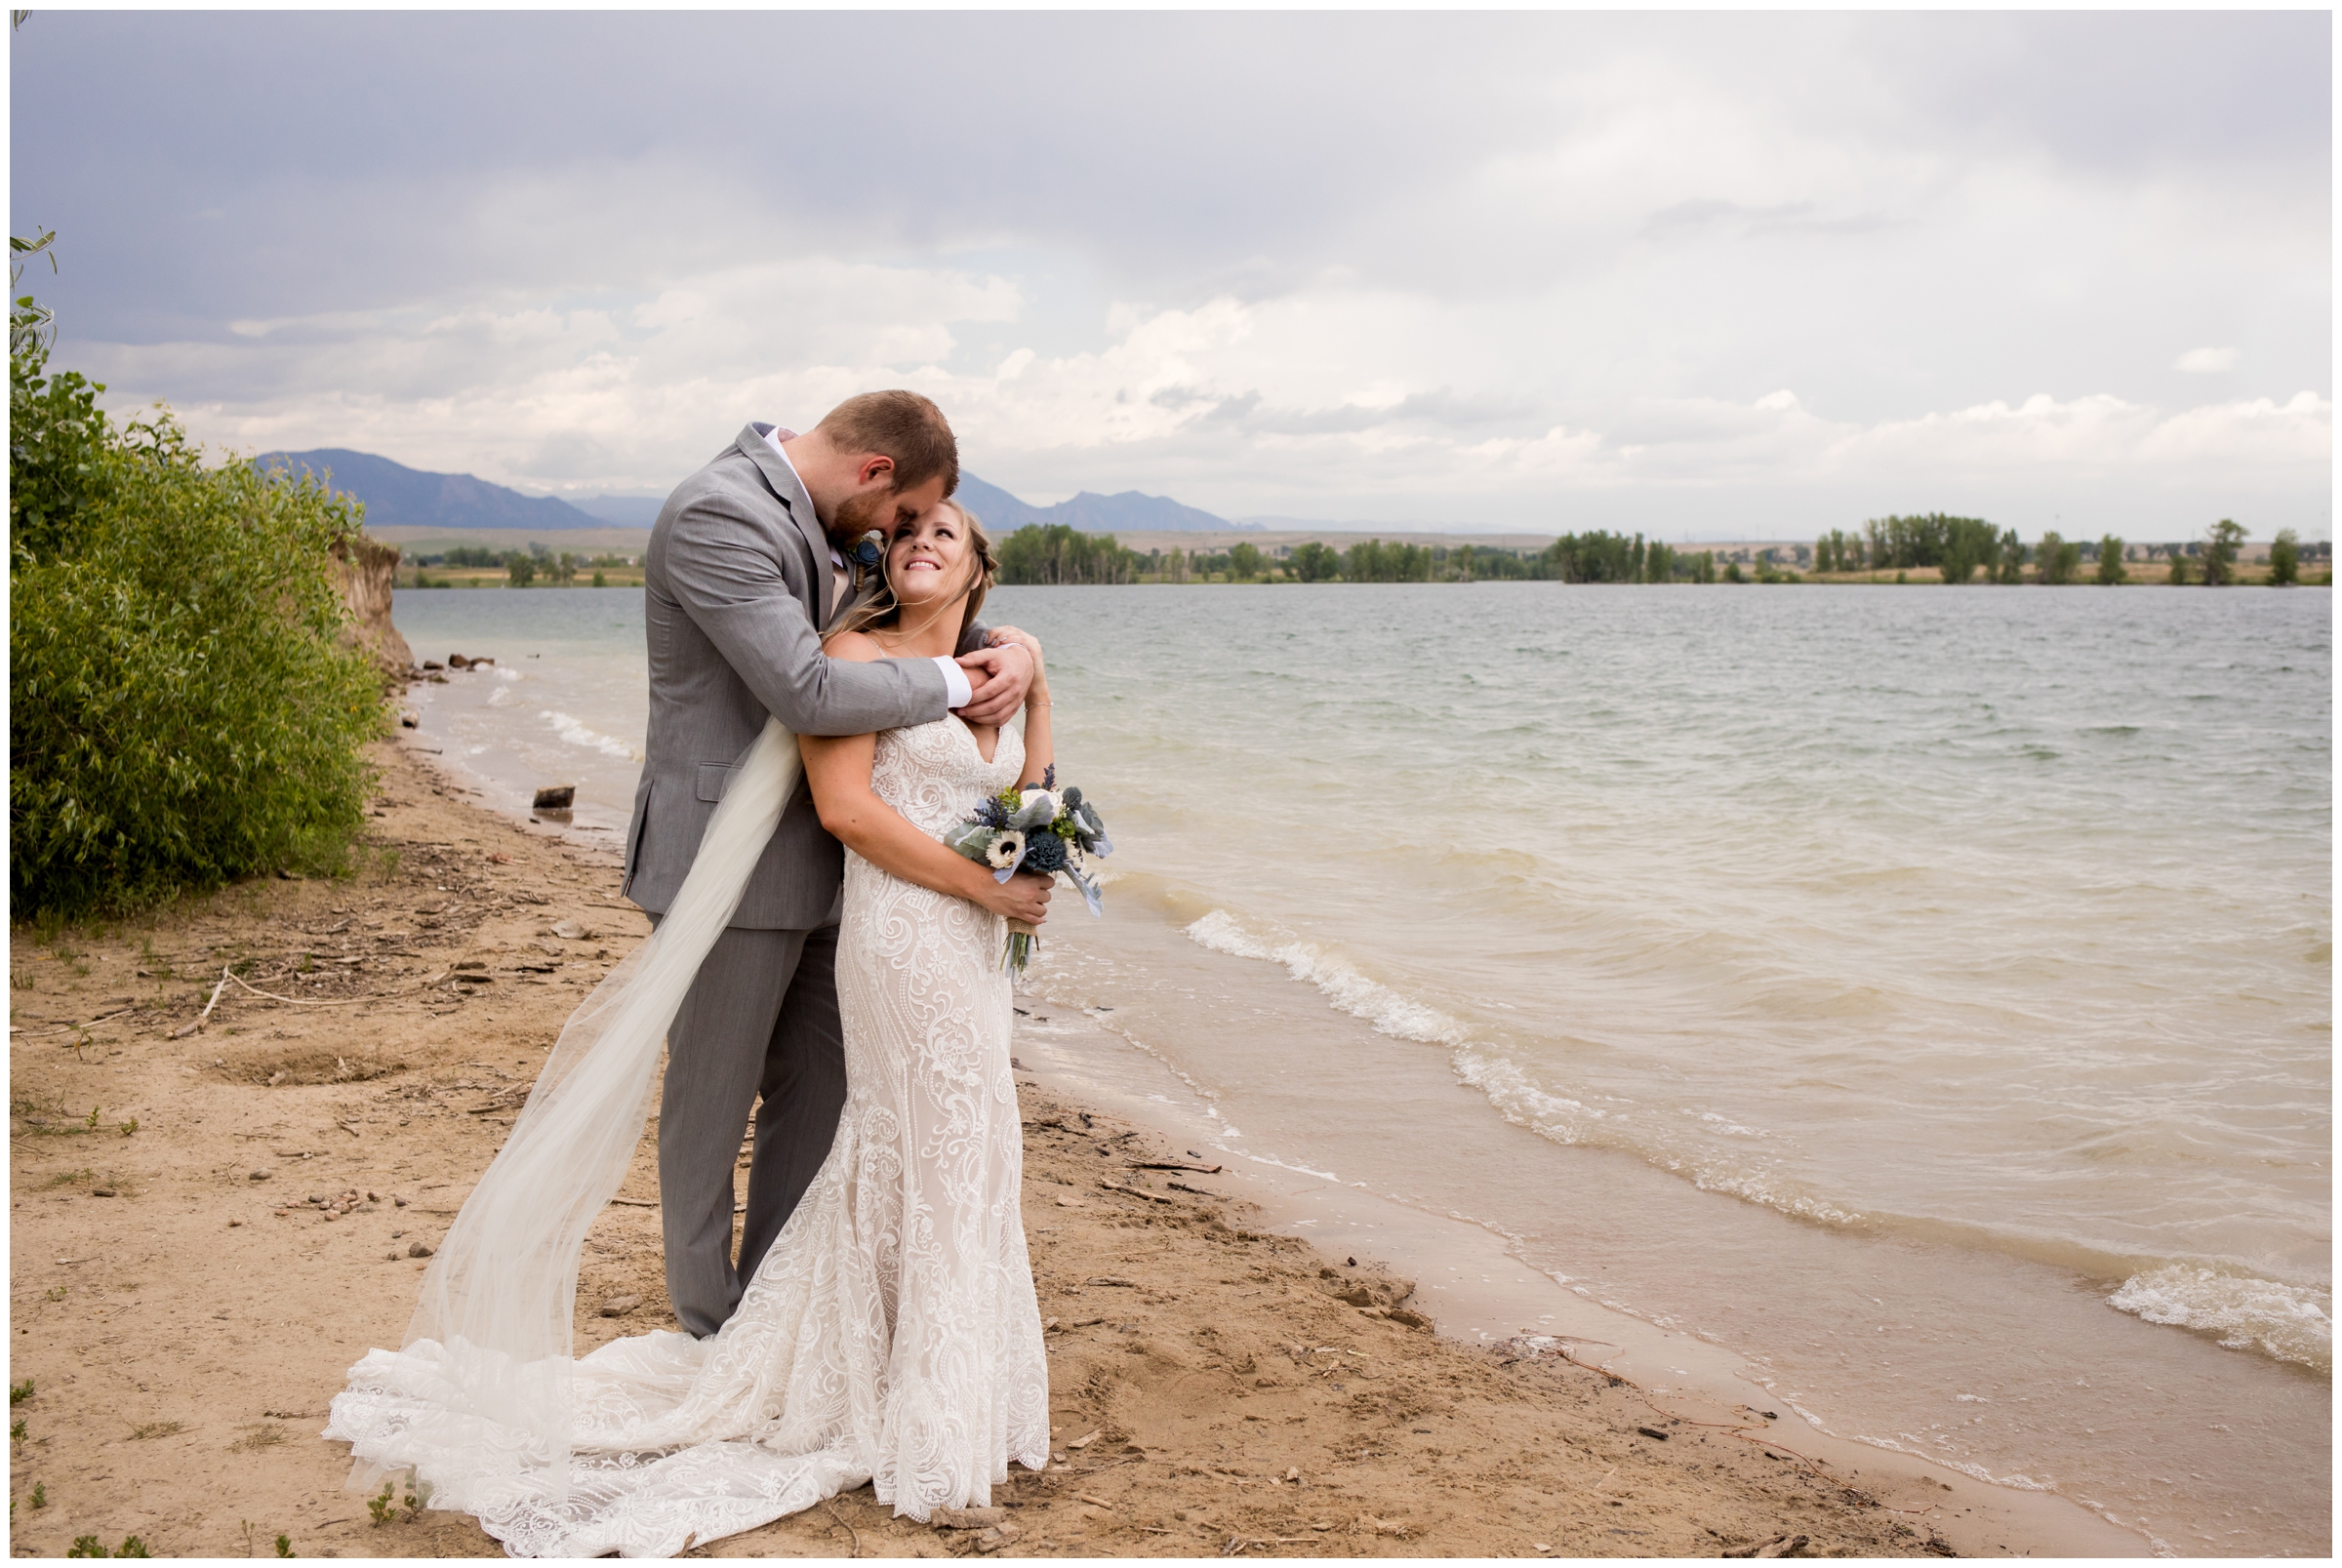 Colorado summer wedding at Standley Lake by Westminster wedding photographer Plum Pretty Photography